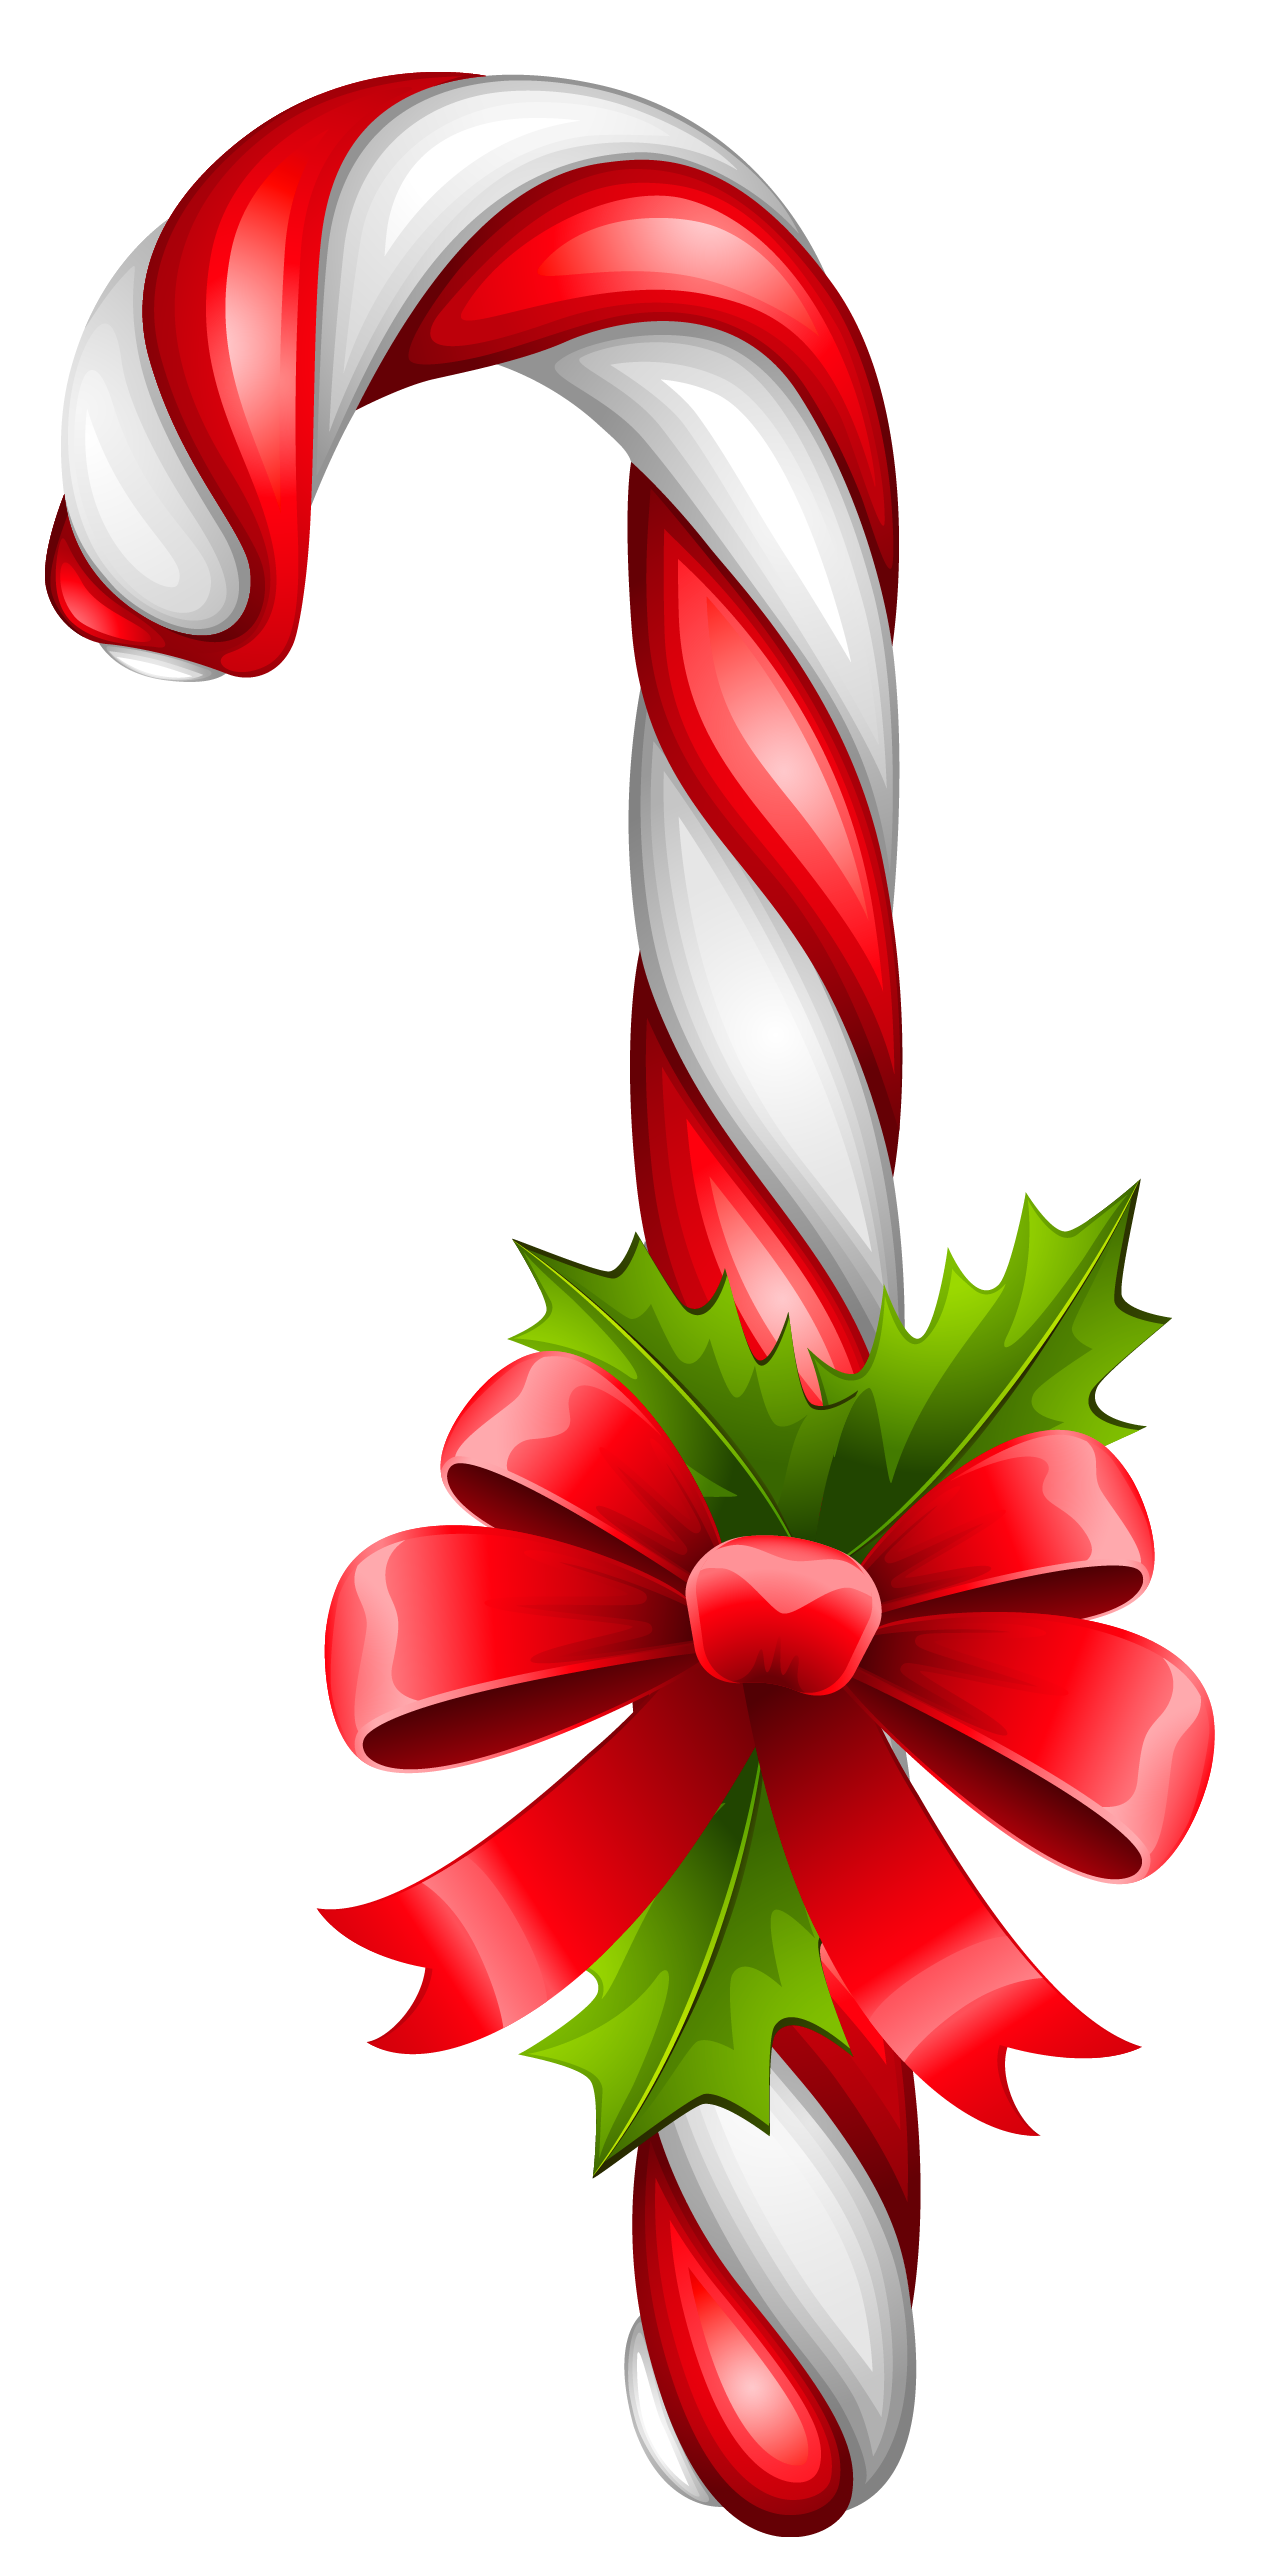 Xmas Images Free Clipart